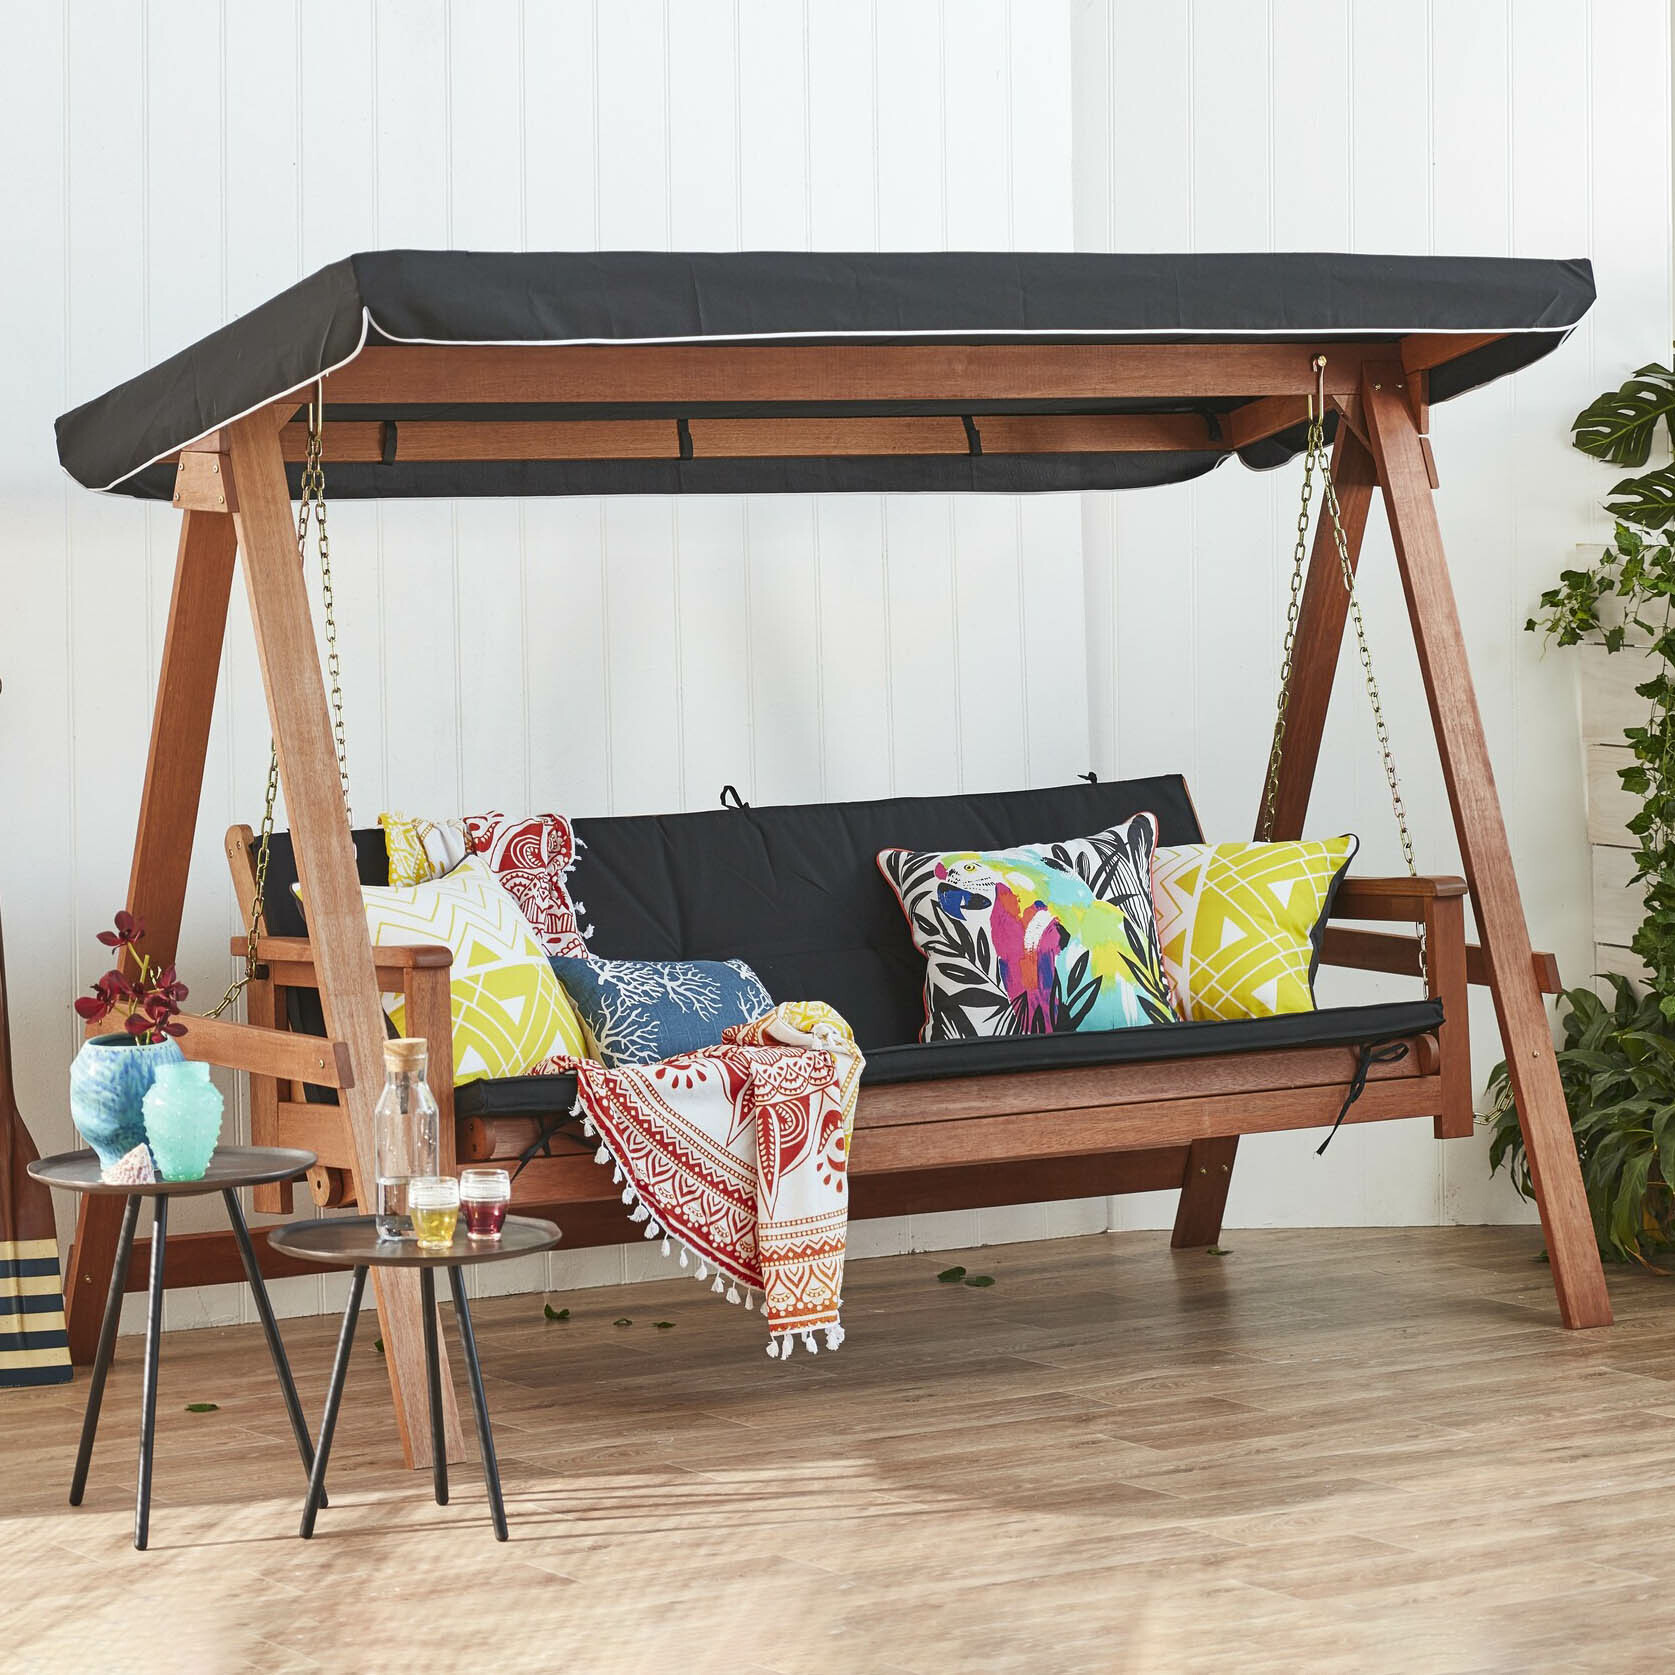 3 Seater Swing Sofa Bed With Canopy, Wooden Lawn Swings With Canopy